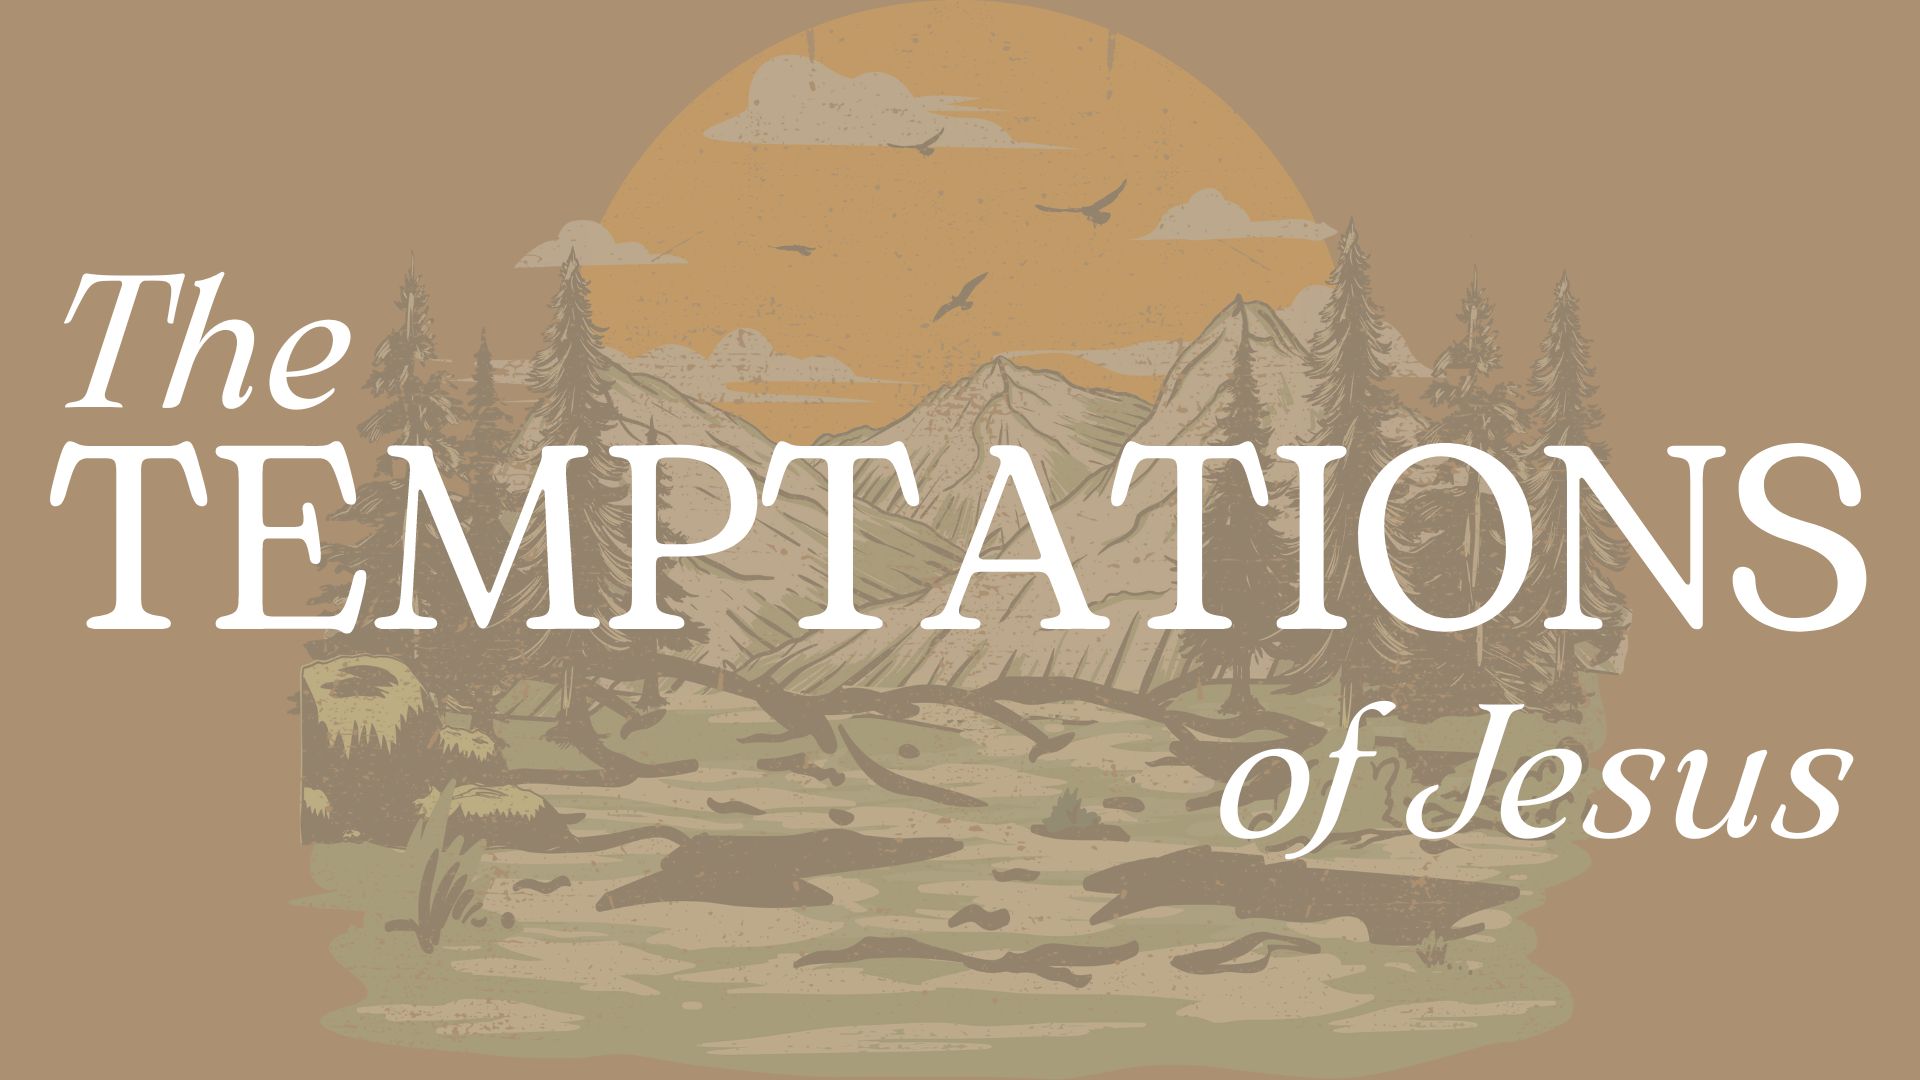 The Last Temptation: Your Will or God's?